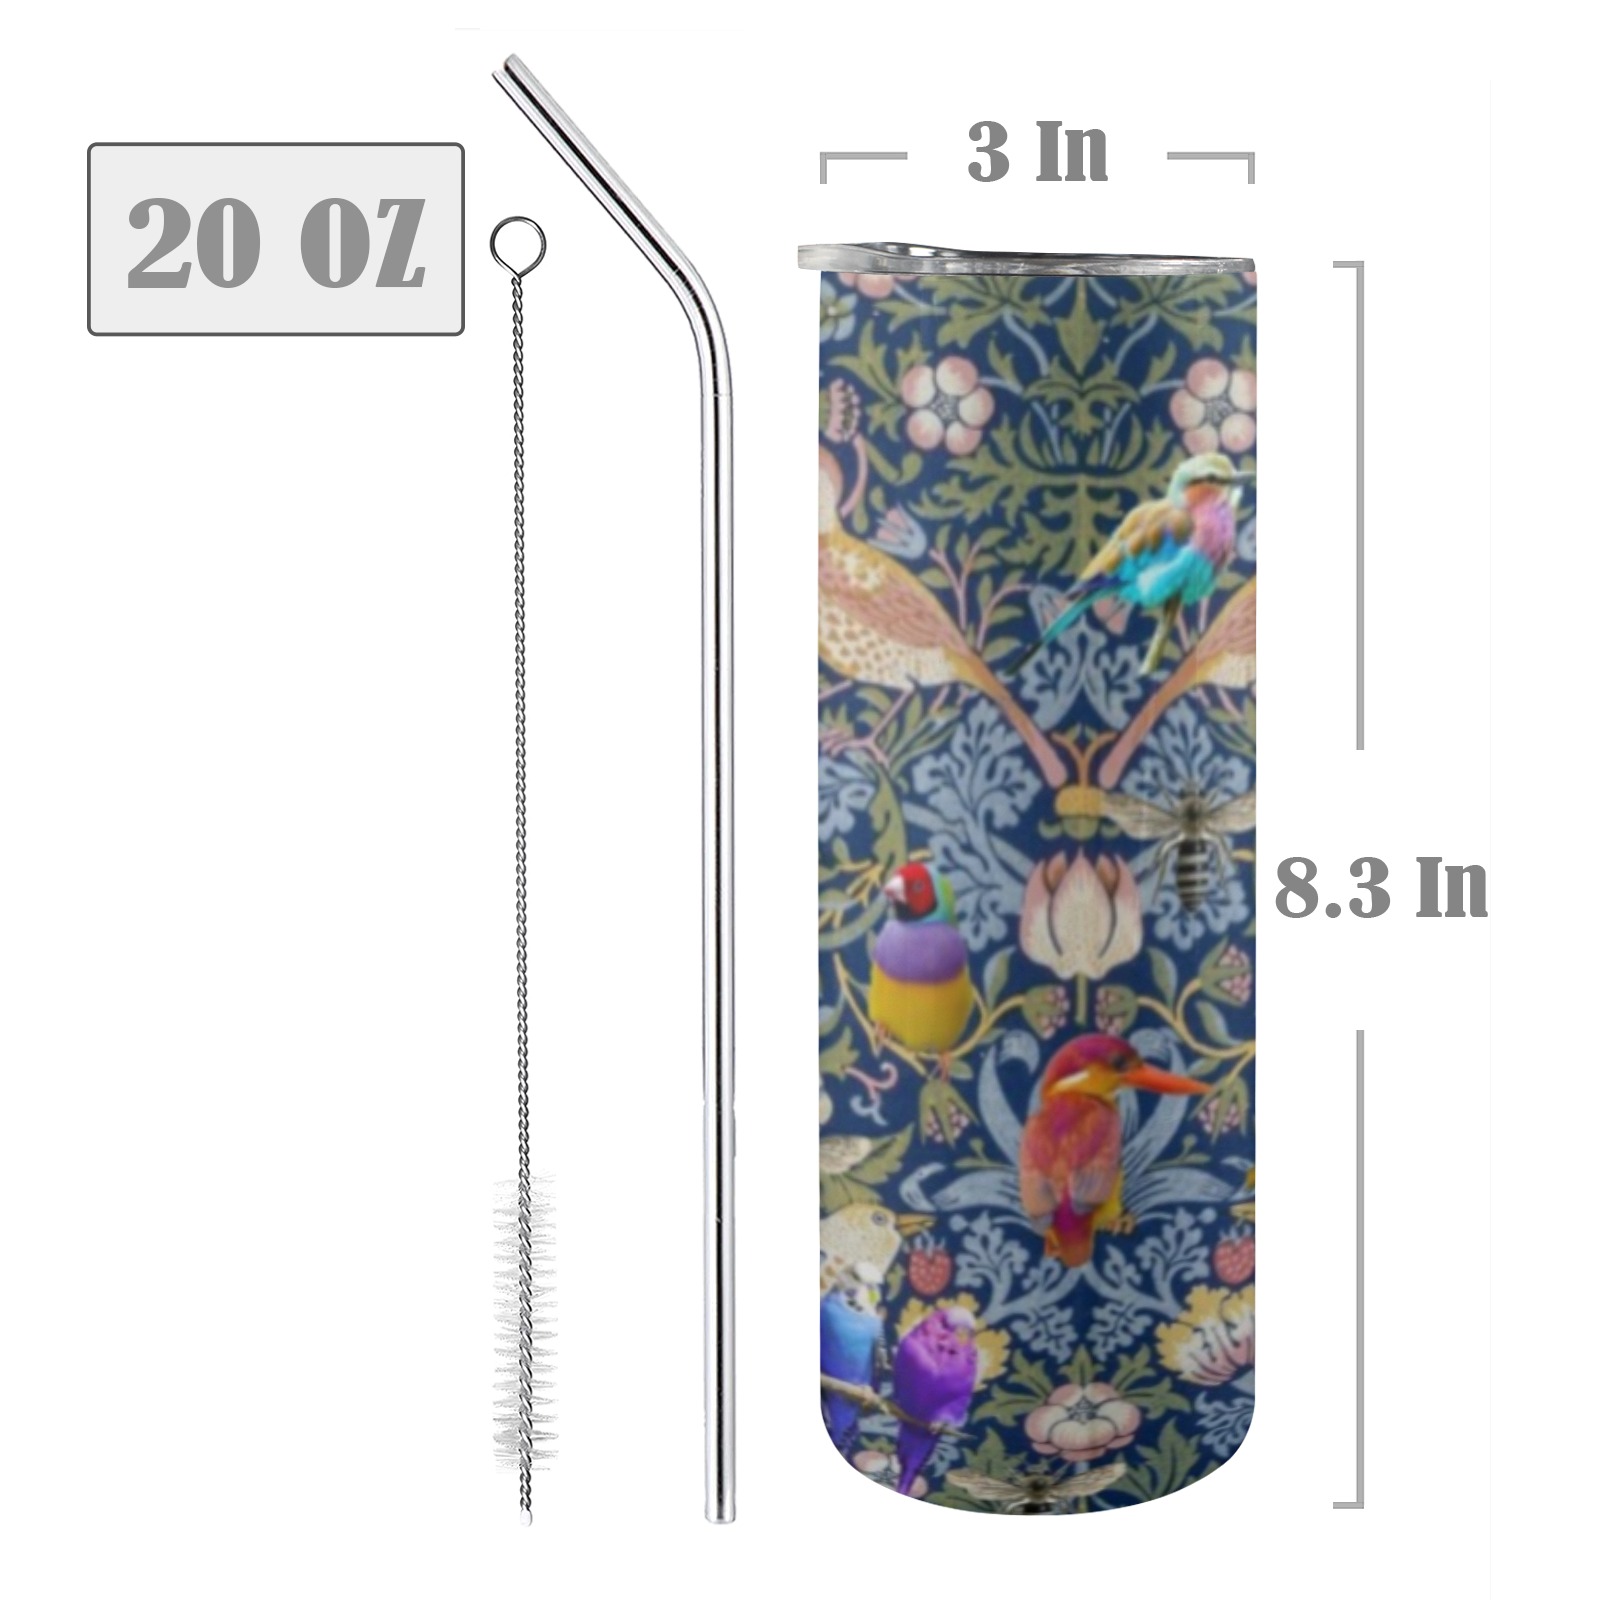 William's Birds 20oz Tall Skinny Tumbler with Lid and Straw